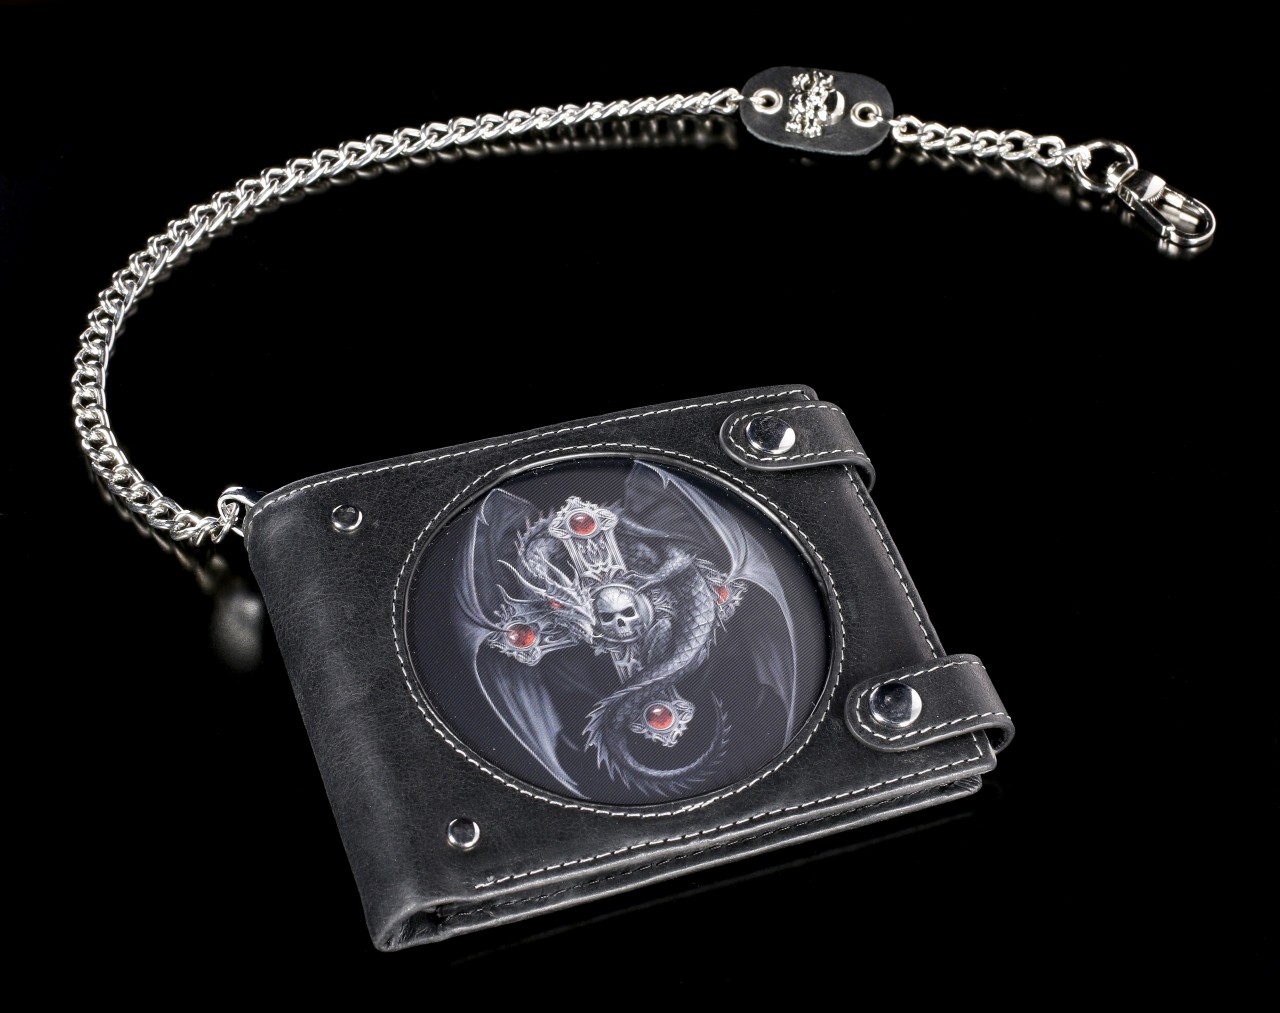 3D Wallet with Dragon - Gothic Guardian